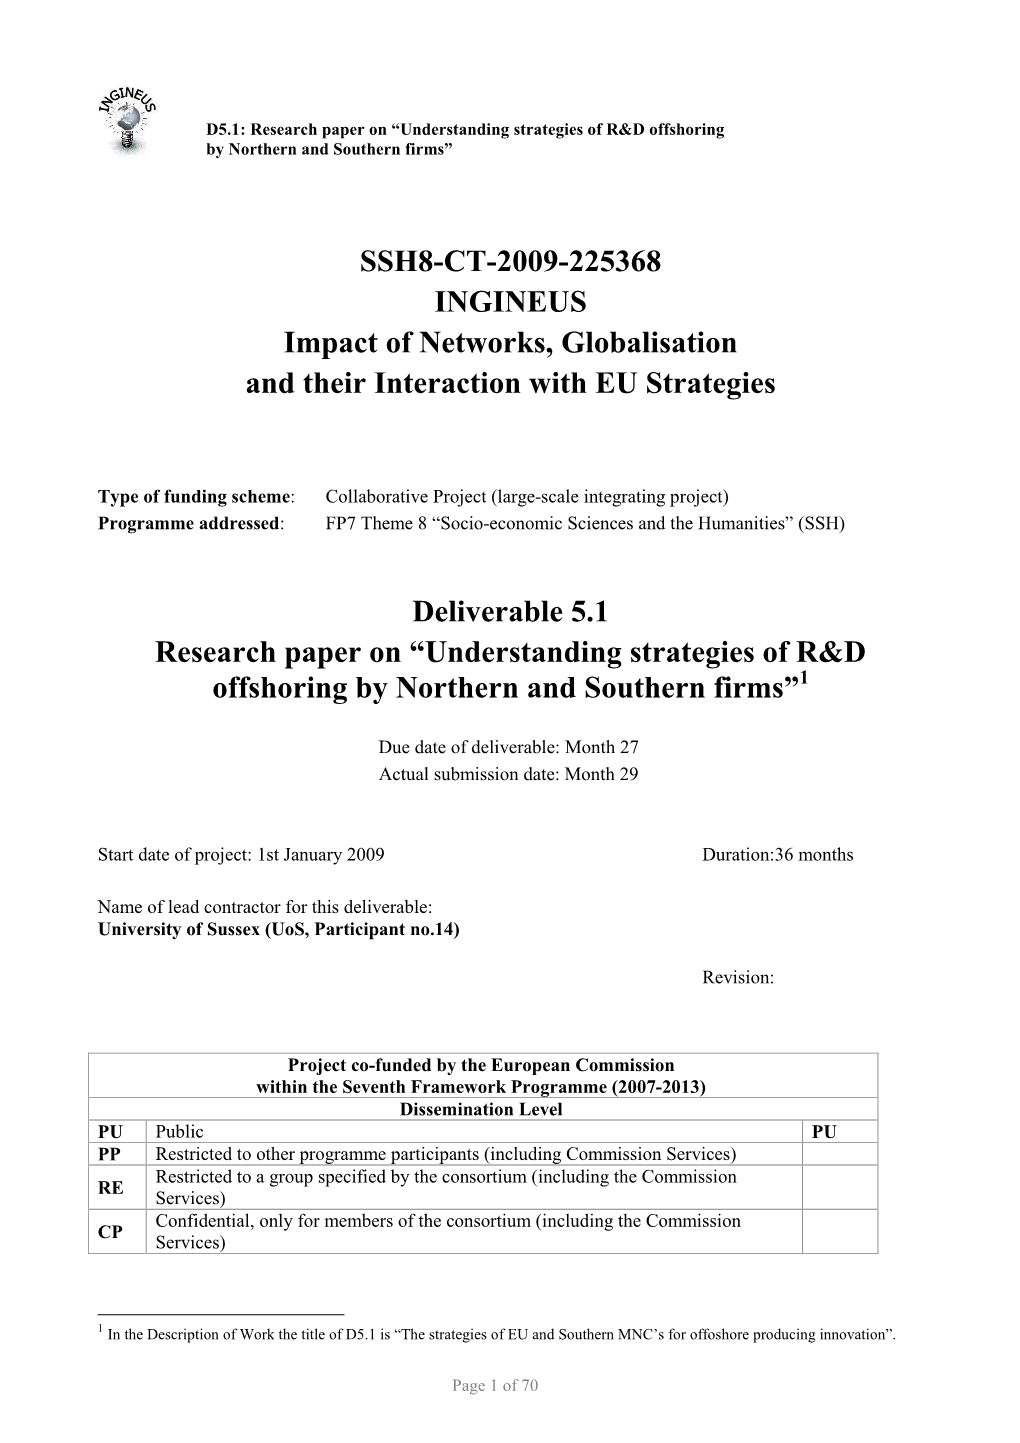 SSH8-CT-2009-225368 INGINEUS Impact of Networks, Globalisation and Their Interaction with EU Strategies